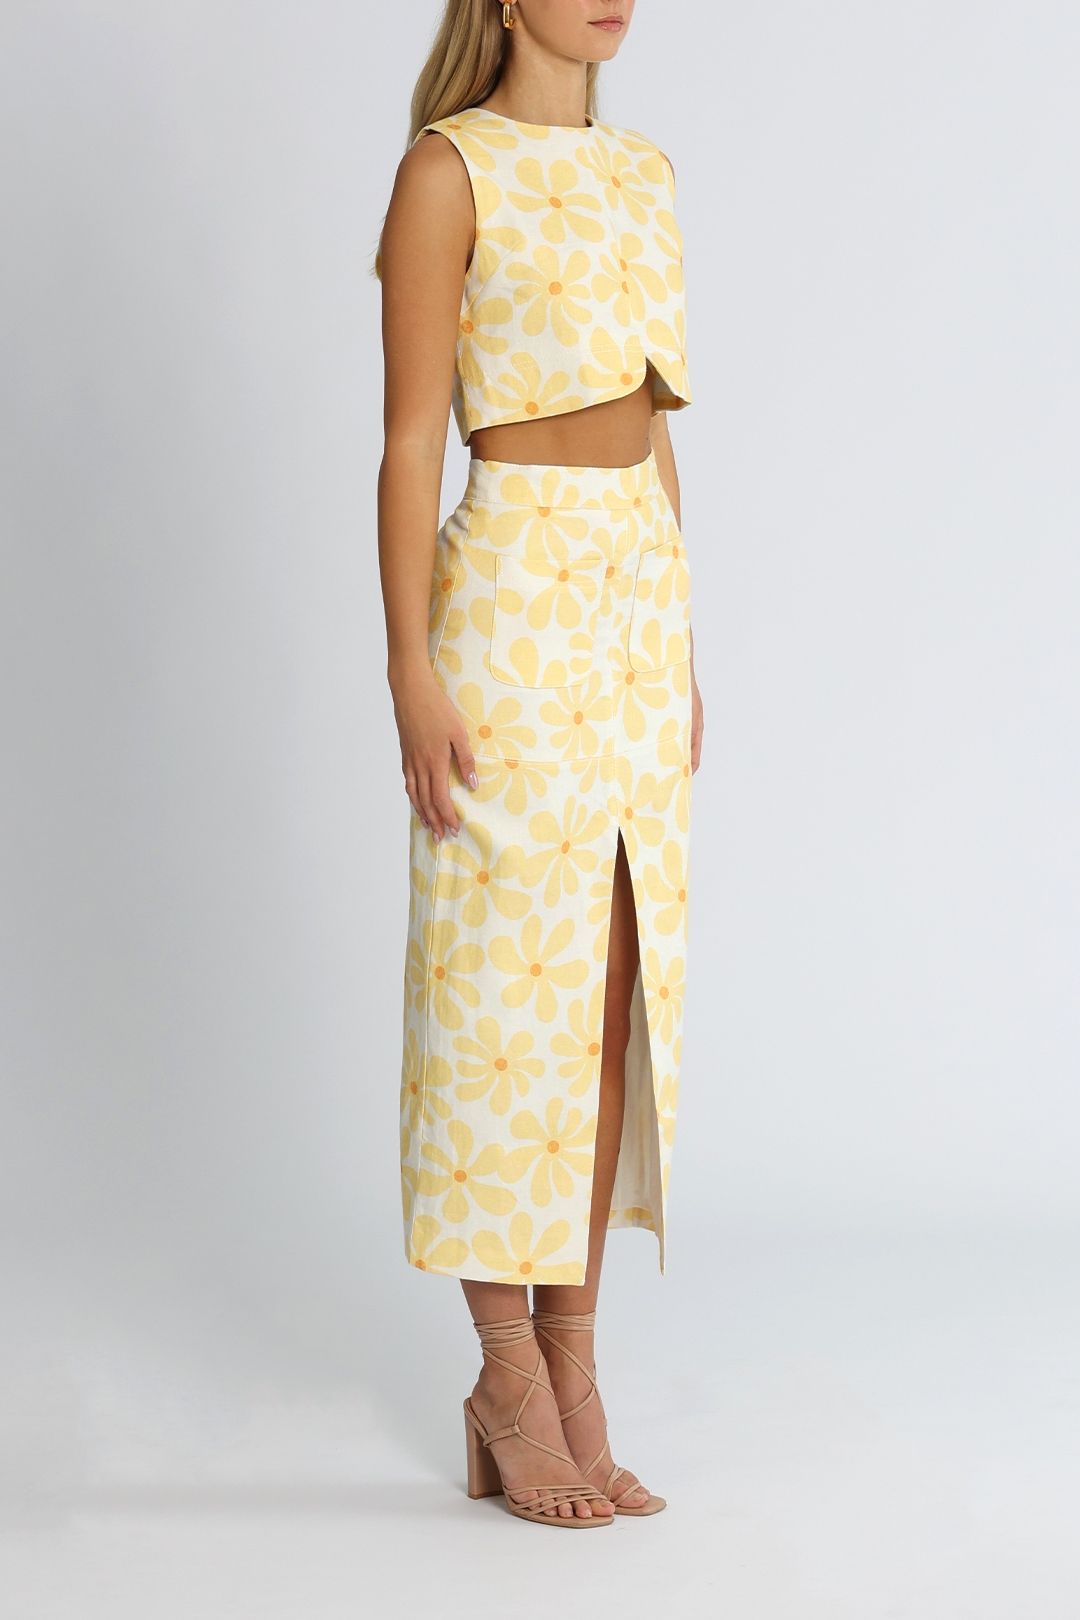 By Johnny Callie Sun Crop and Skirt Set Yellow